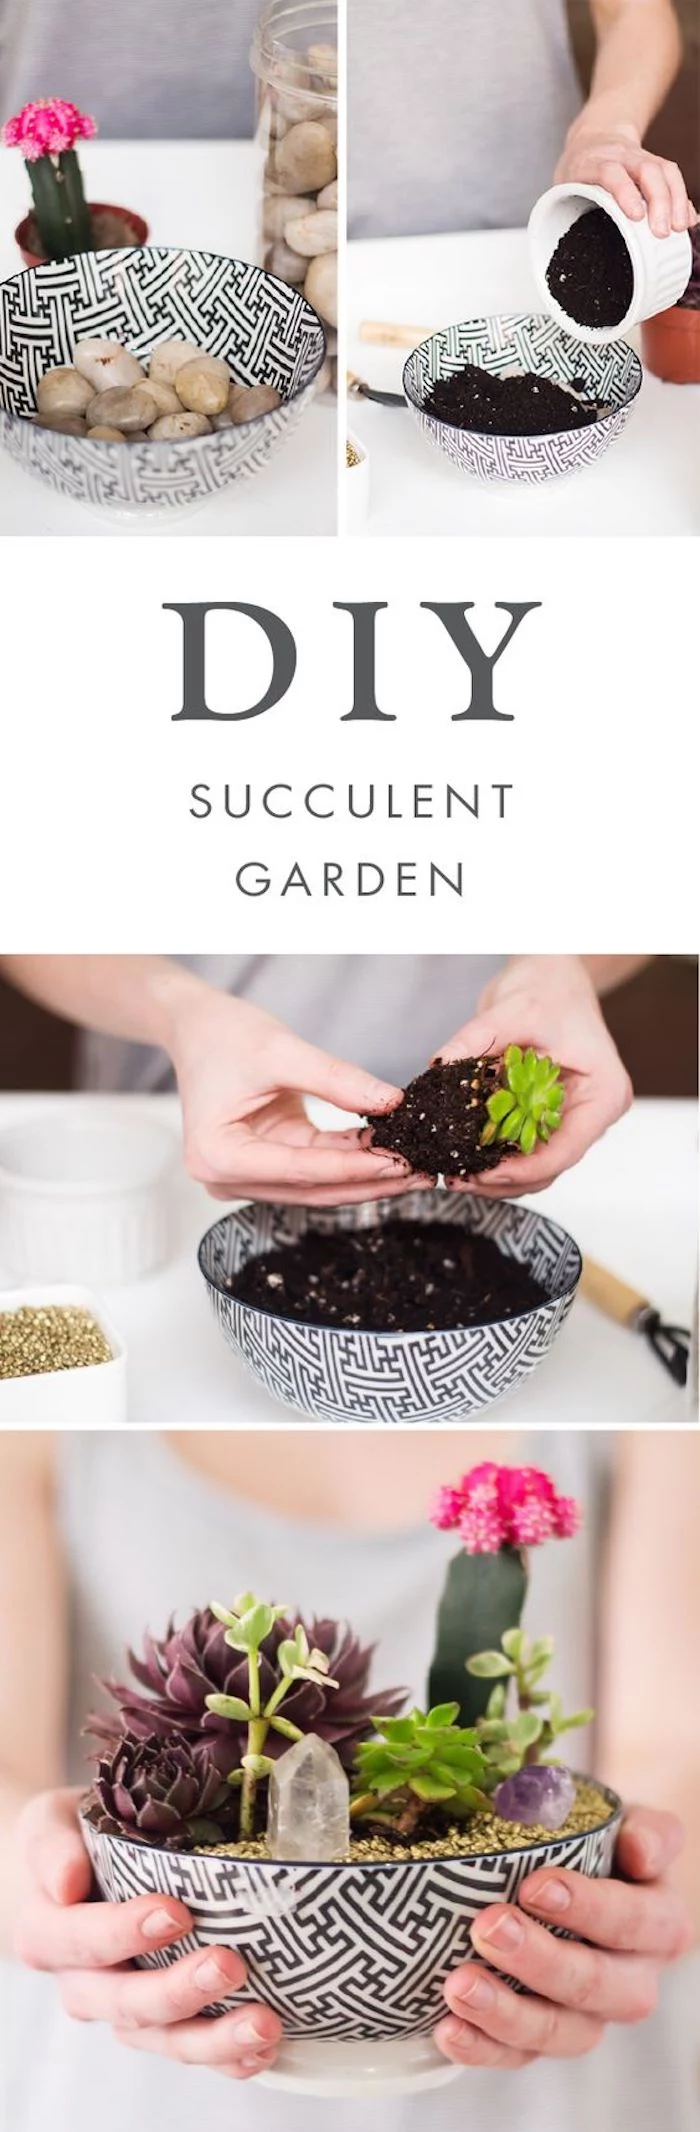 diy succulent garden, cool diy projects, ceramic bowl, filled with rocks and dirt